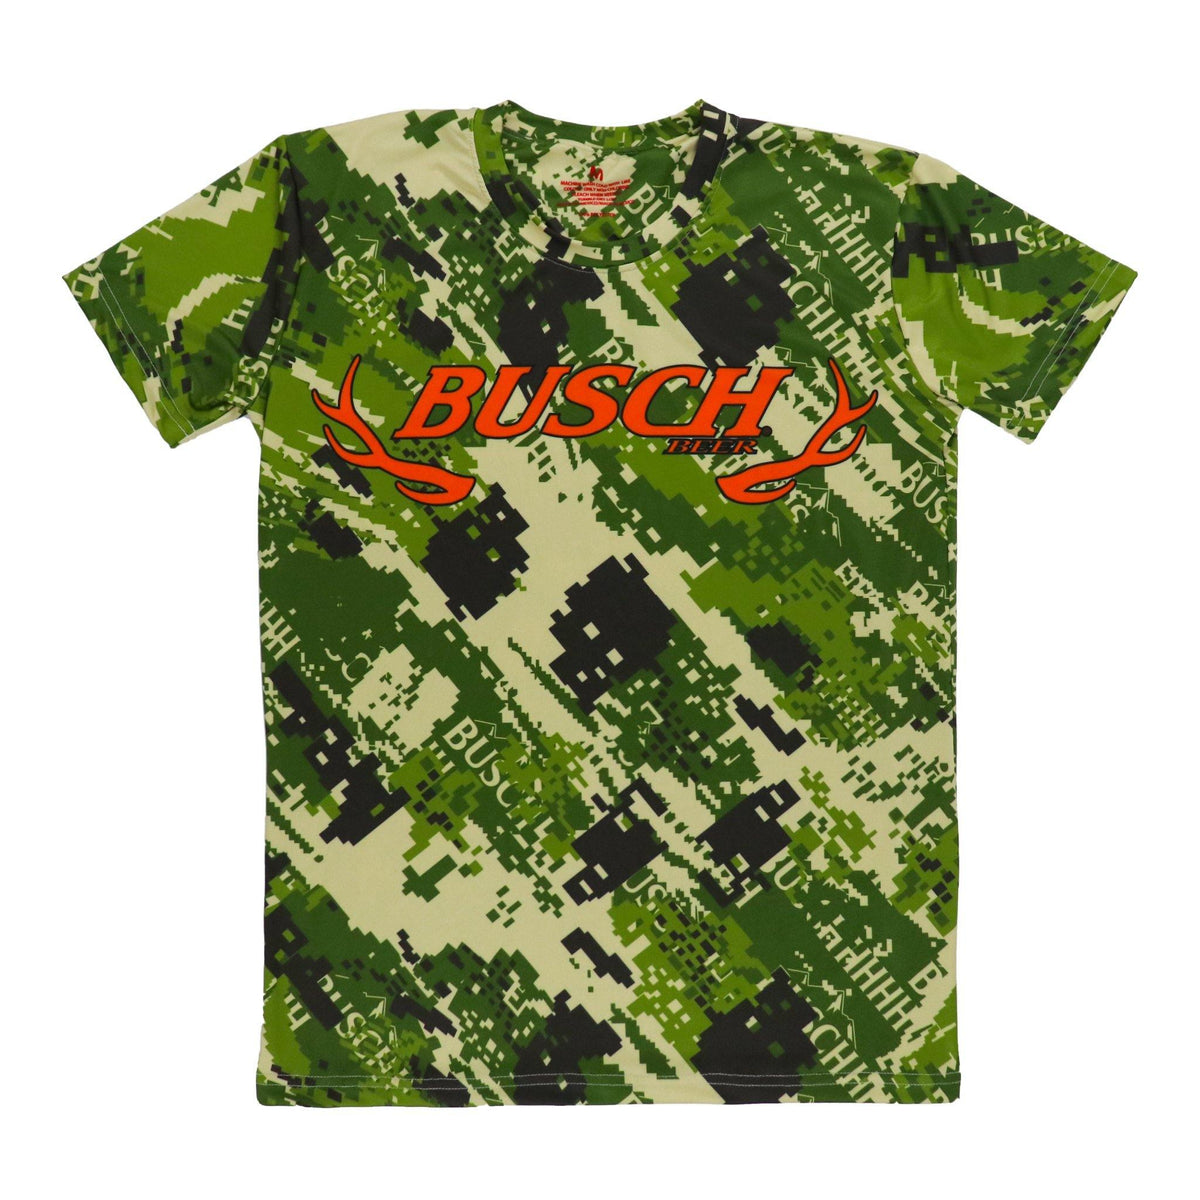 https://www.shopbeergearus.shop/wp-content/uploads/1692/11/we-pride-ourselves-on-treating-each-and-every-customer-in-our-store-as-if-they-are-family-helping-people-to-locate-the-busch-camo-t-shirt-busch_0.jpg